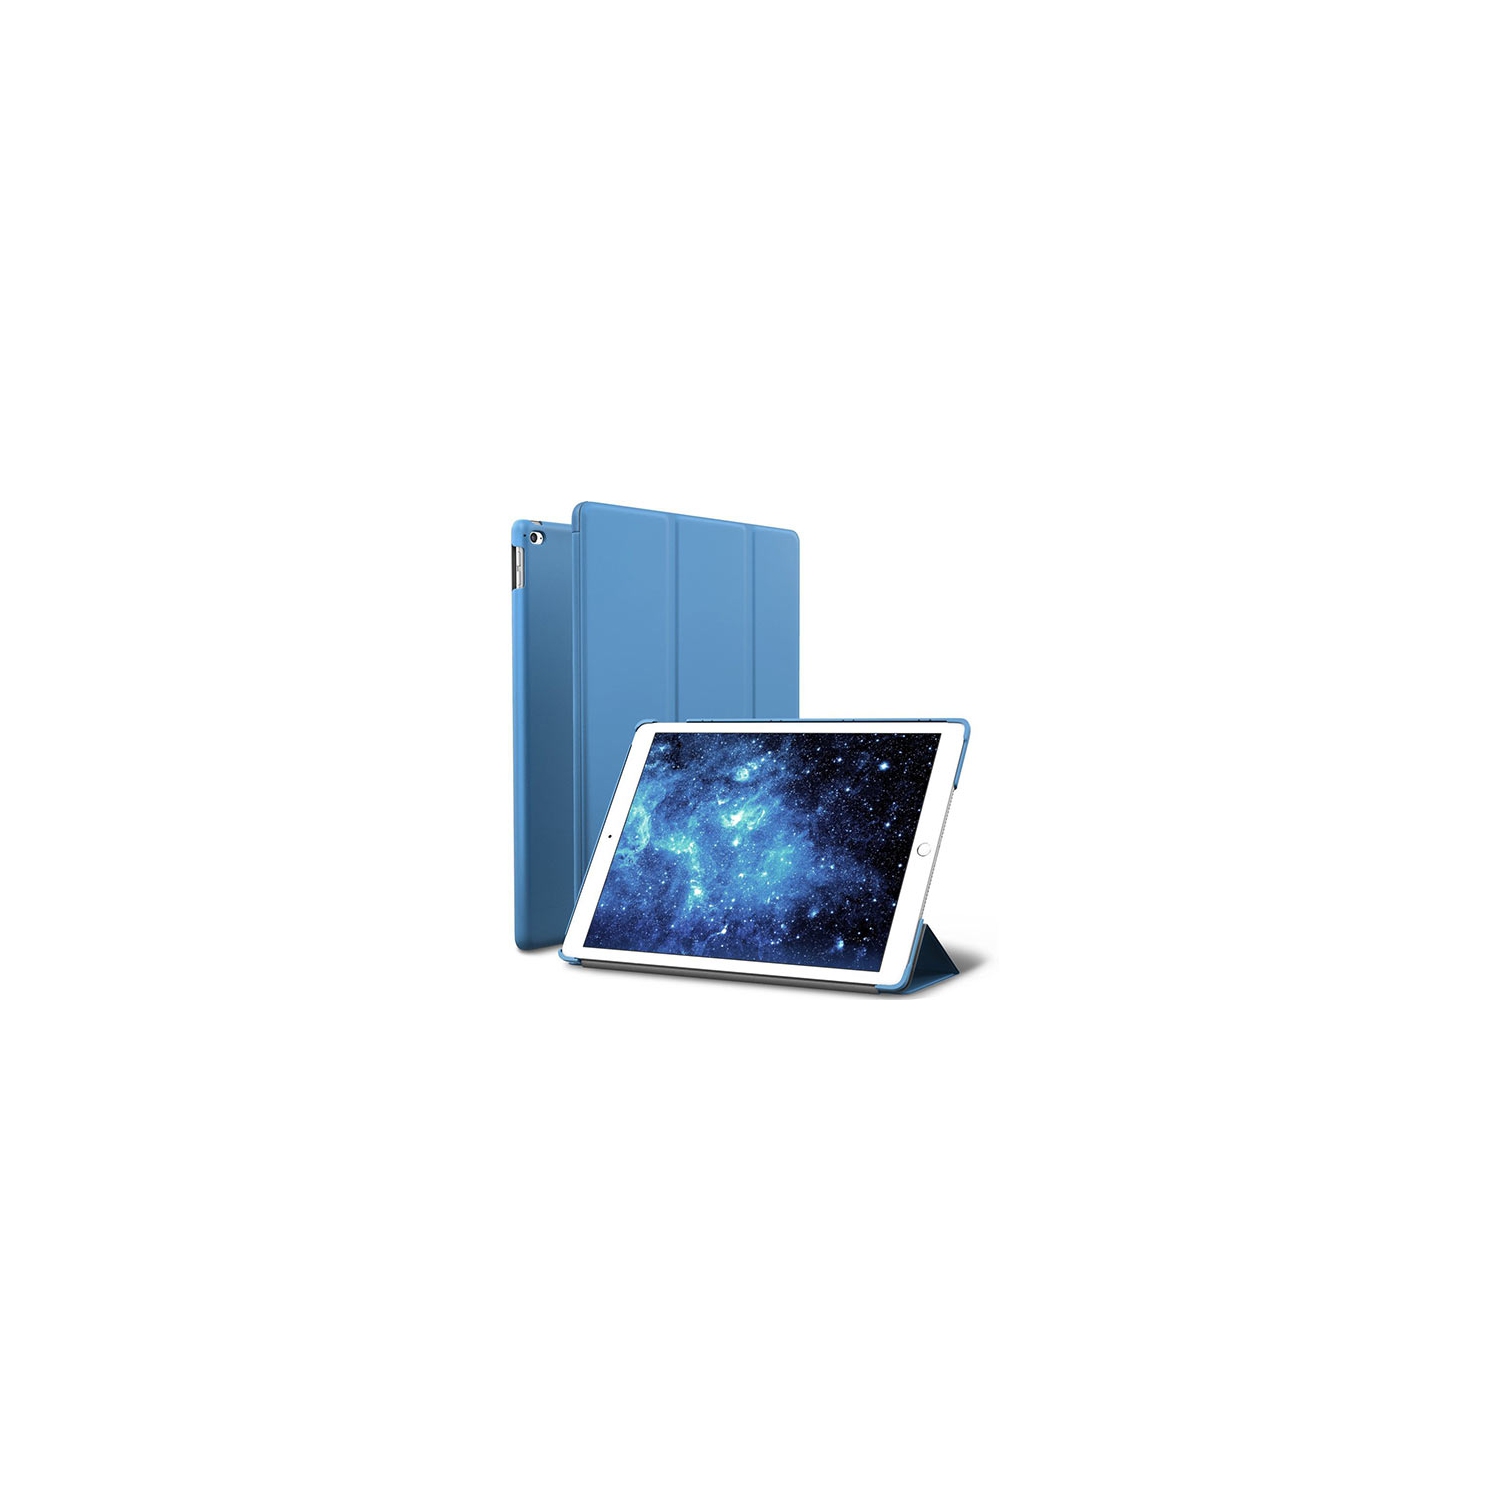 【CSmart】 Slim Magnetic Smart Cover Stand Case for iPad Air 2 2nd Gen. (9.7"), Blue